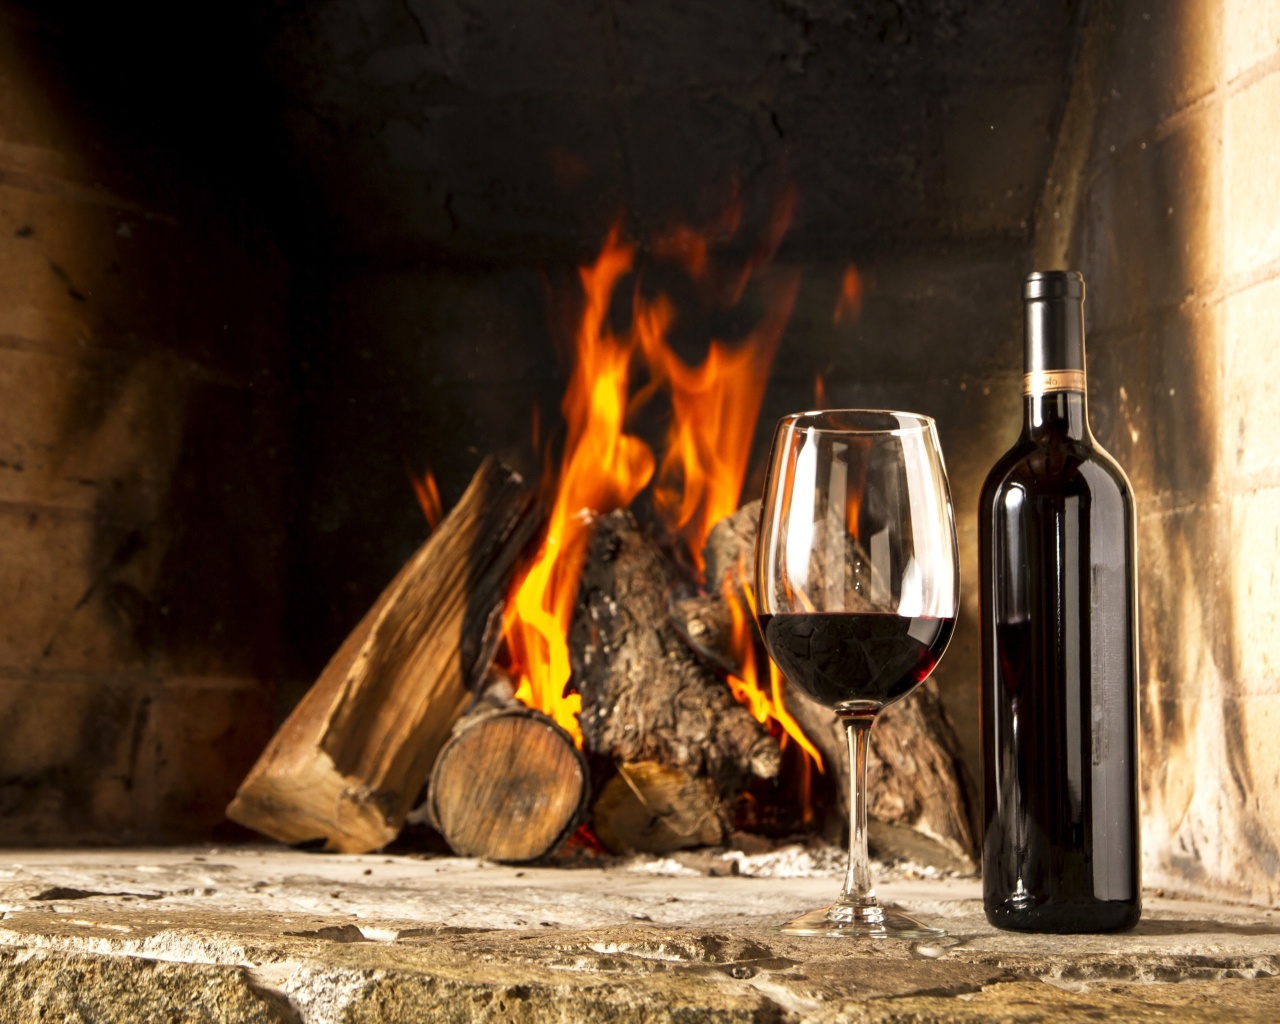 Das Wine and fireplace Wallpaper 1280x1024